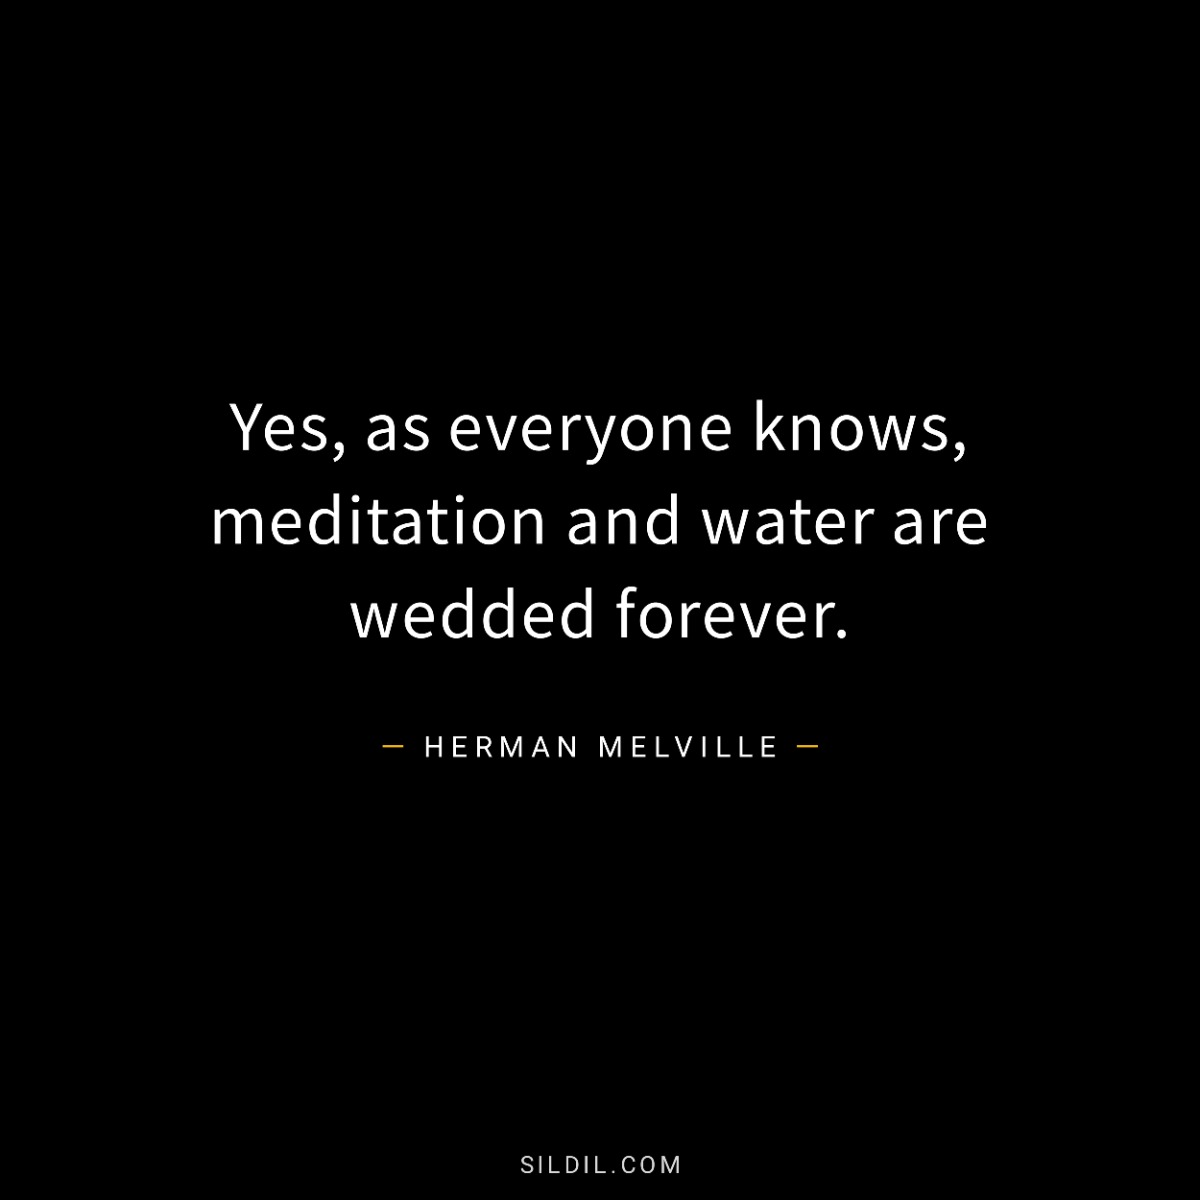 Yes, as everyone knows, meditation and water are wedded forever.